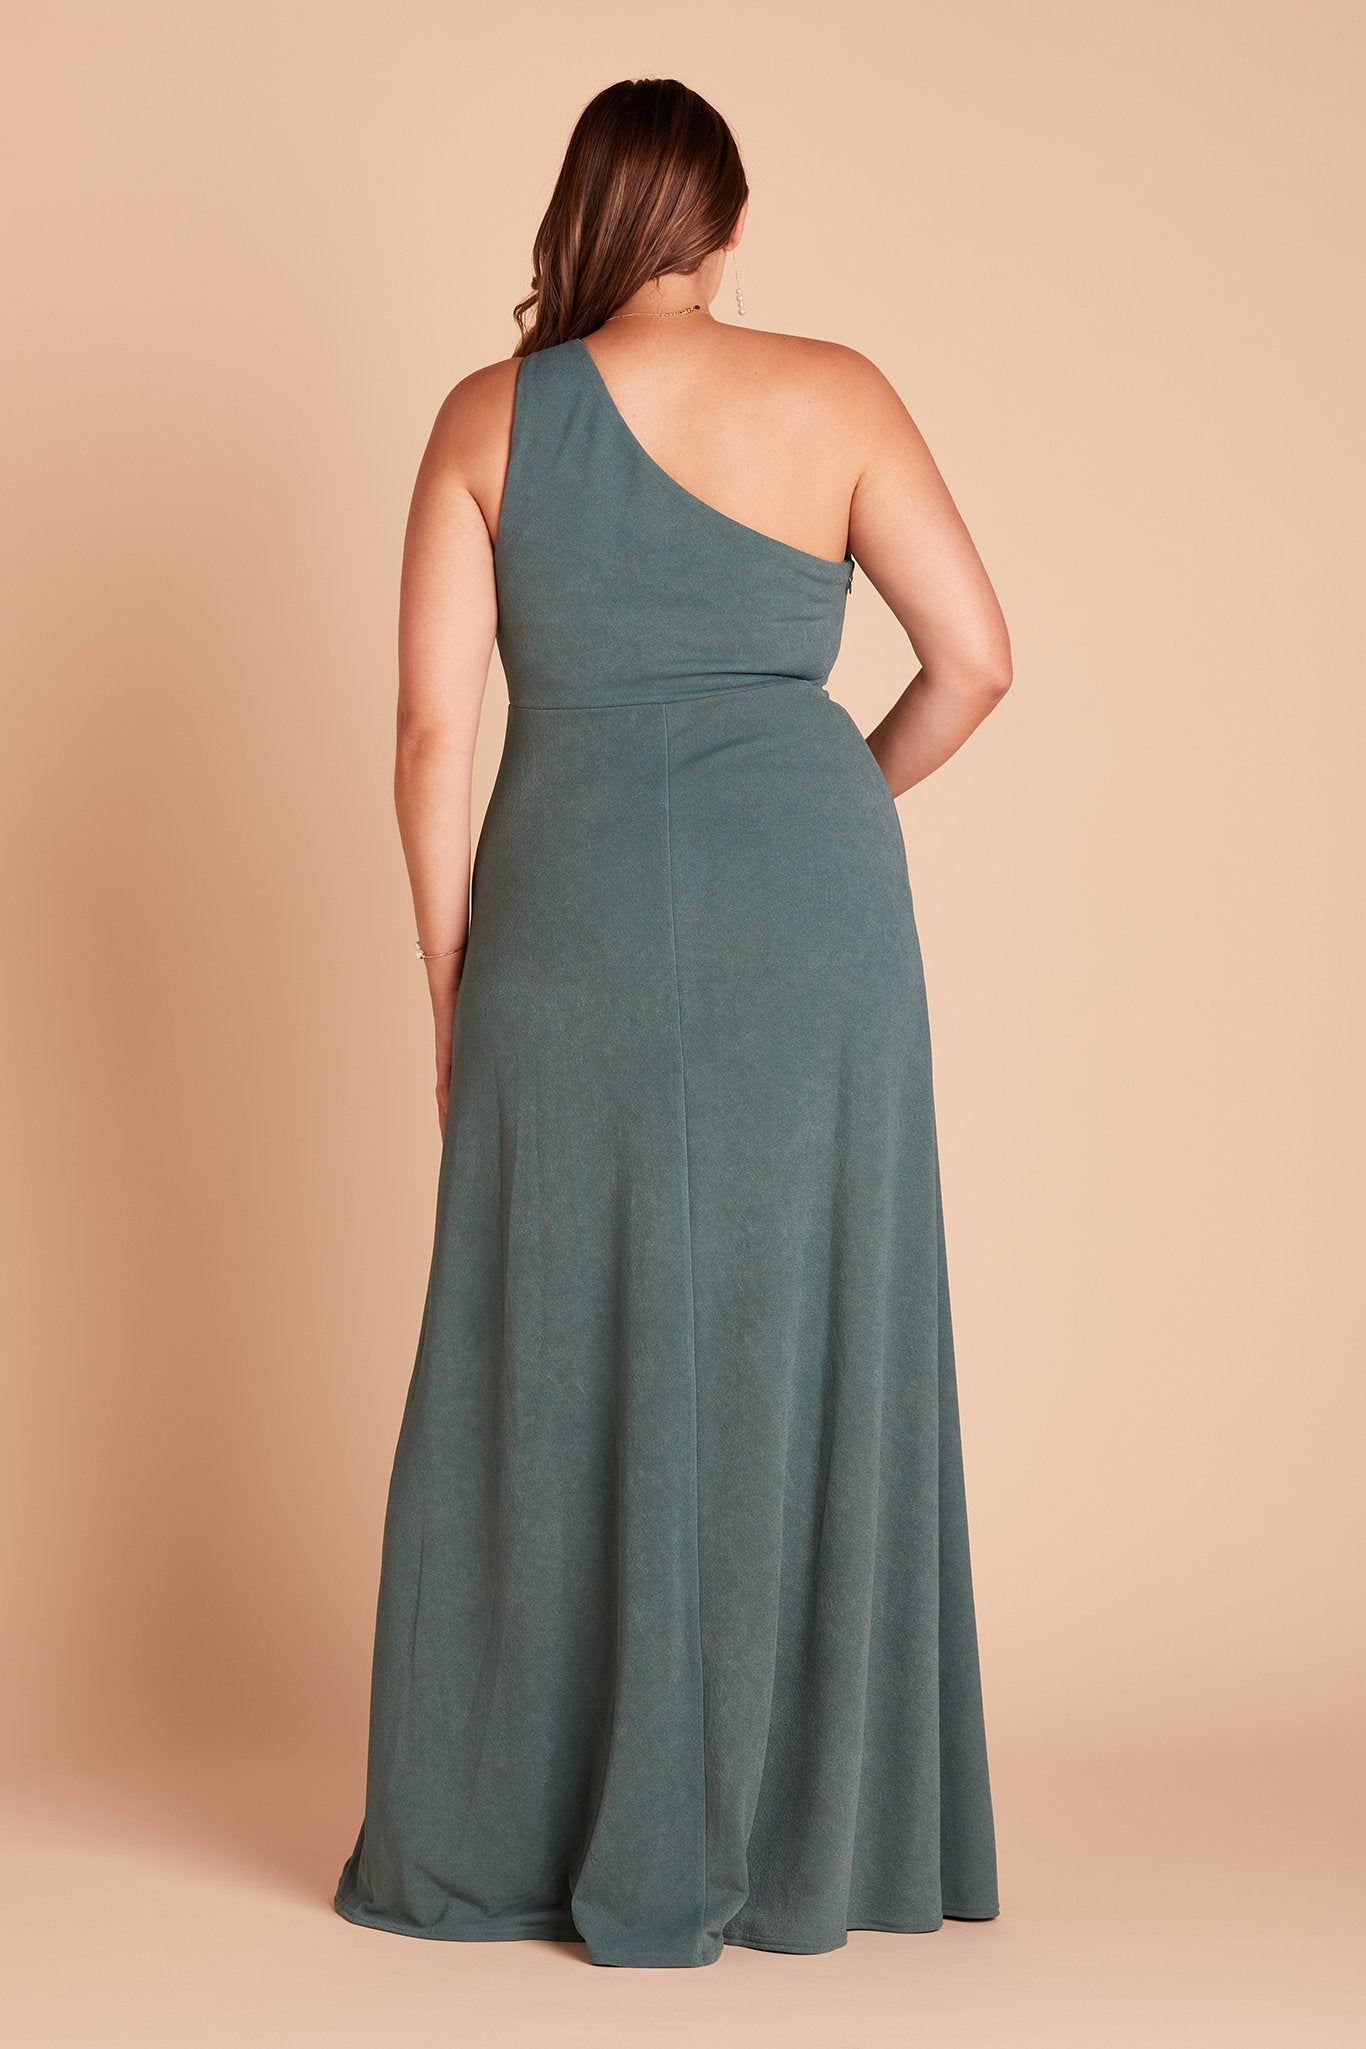 Kira plus size bridesmaid dress with slit in sea glass green crepe by Birdy Grey, back view